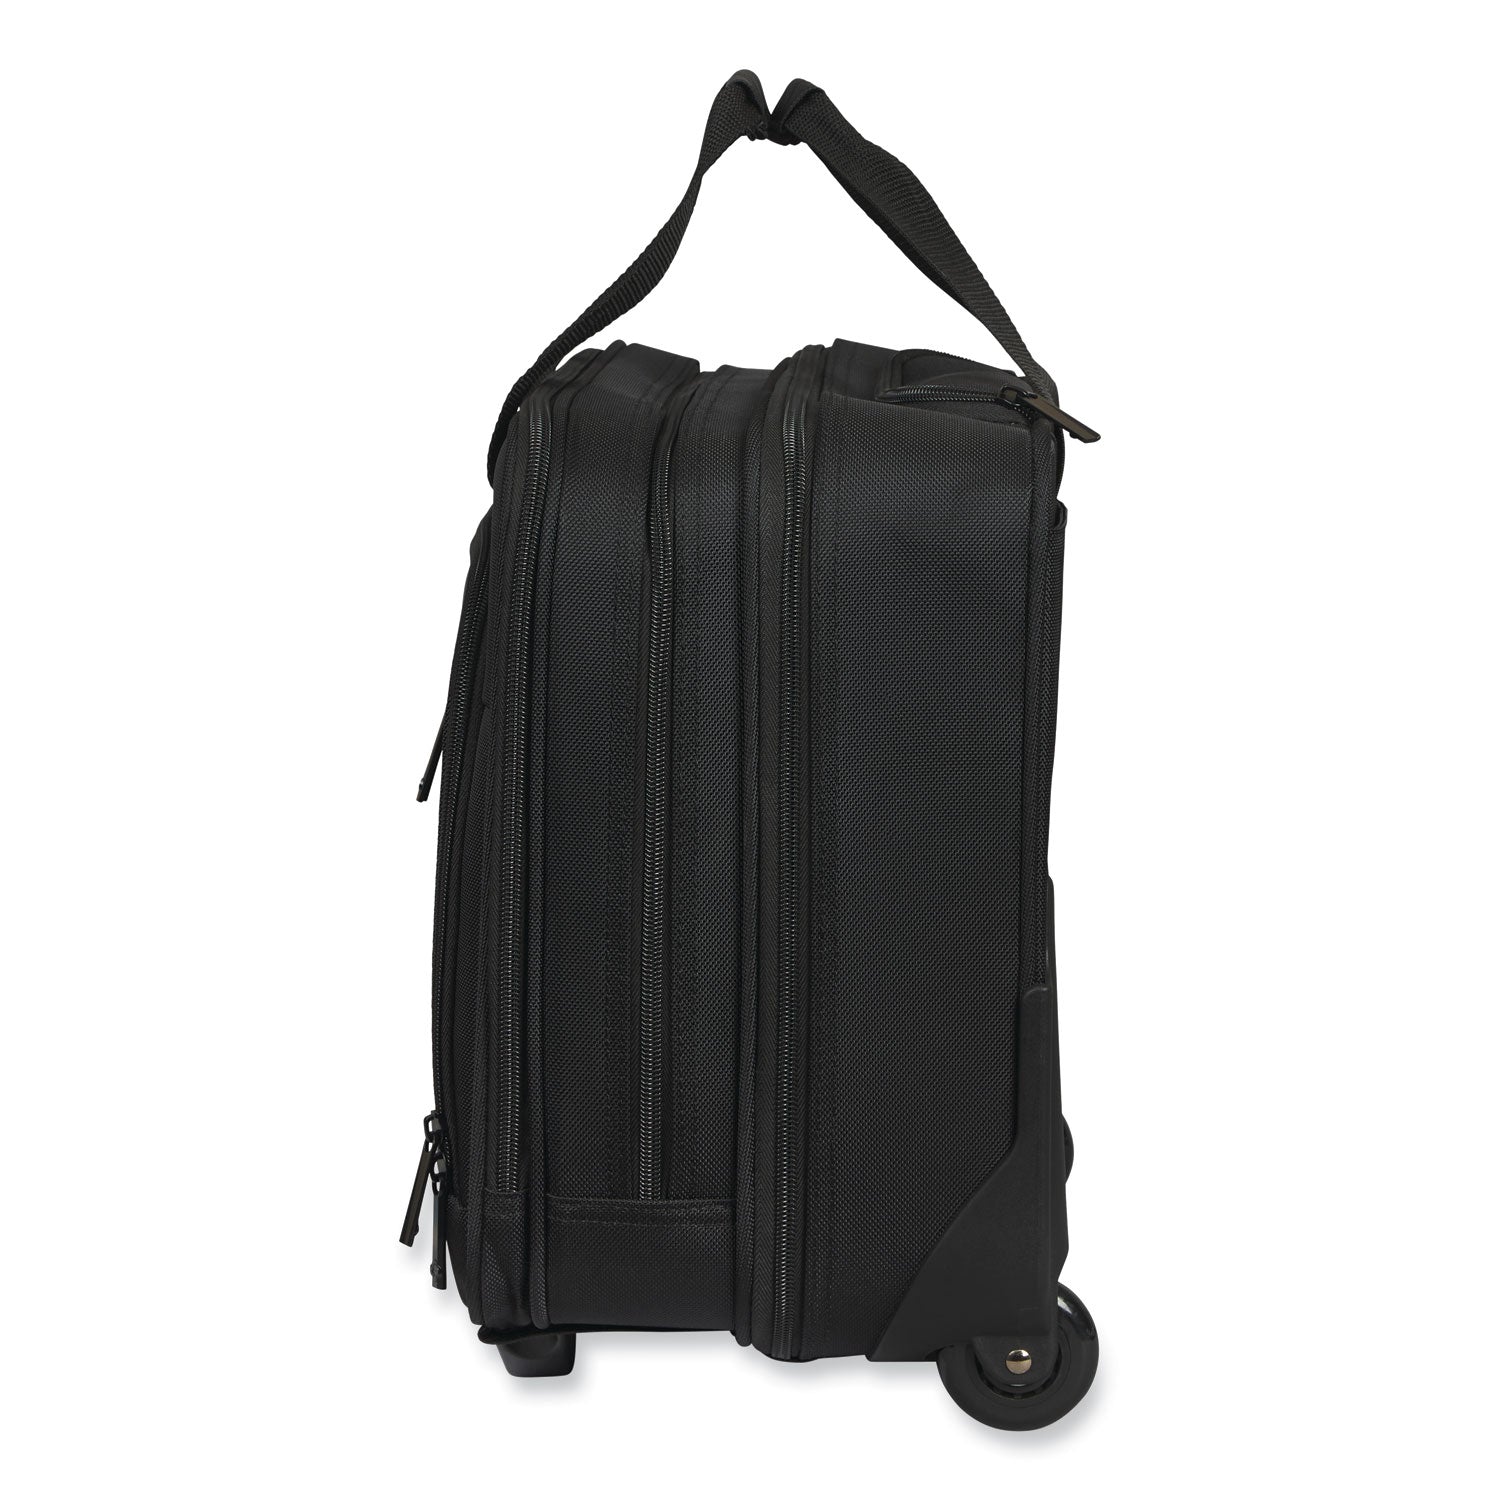 rolling-business-case-fits-devices-up-to-156-polyester-1654-x-8-x-906-black_sml1412781041 - 2